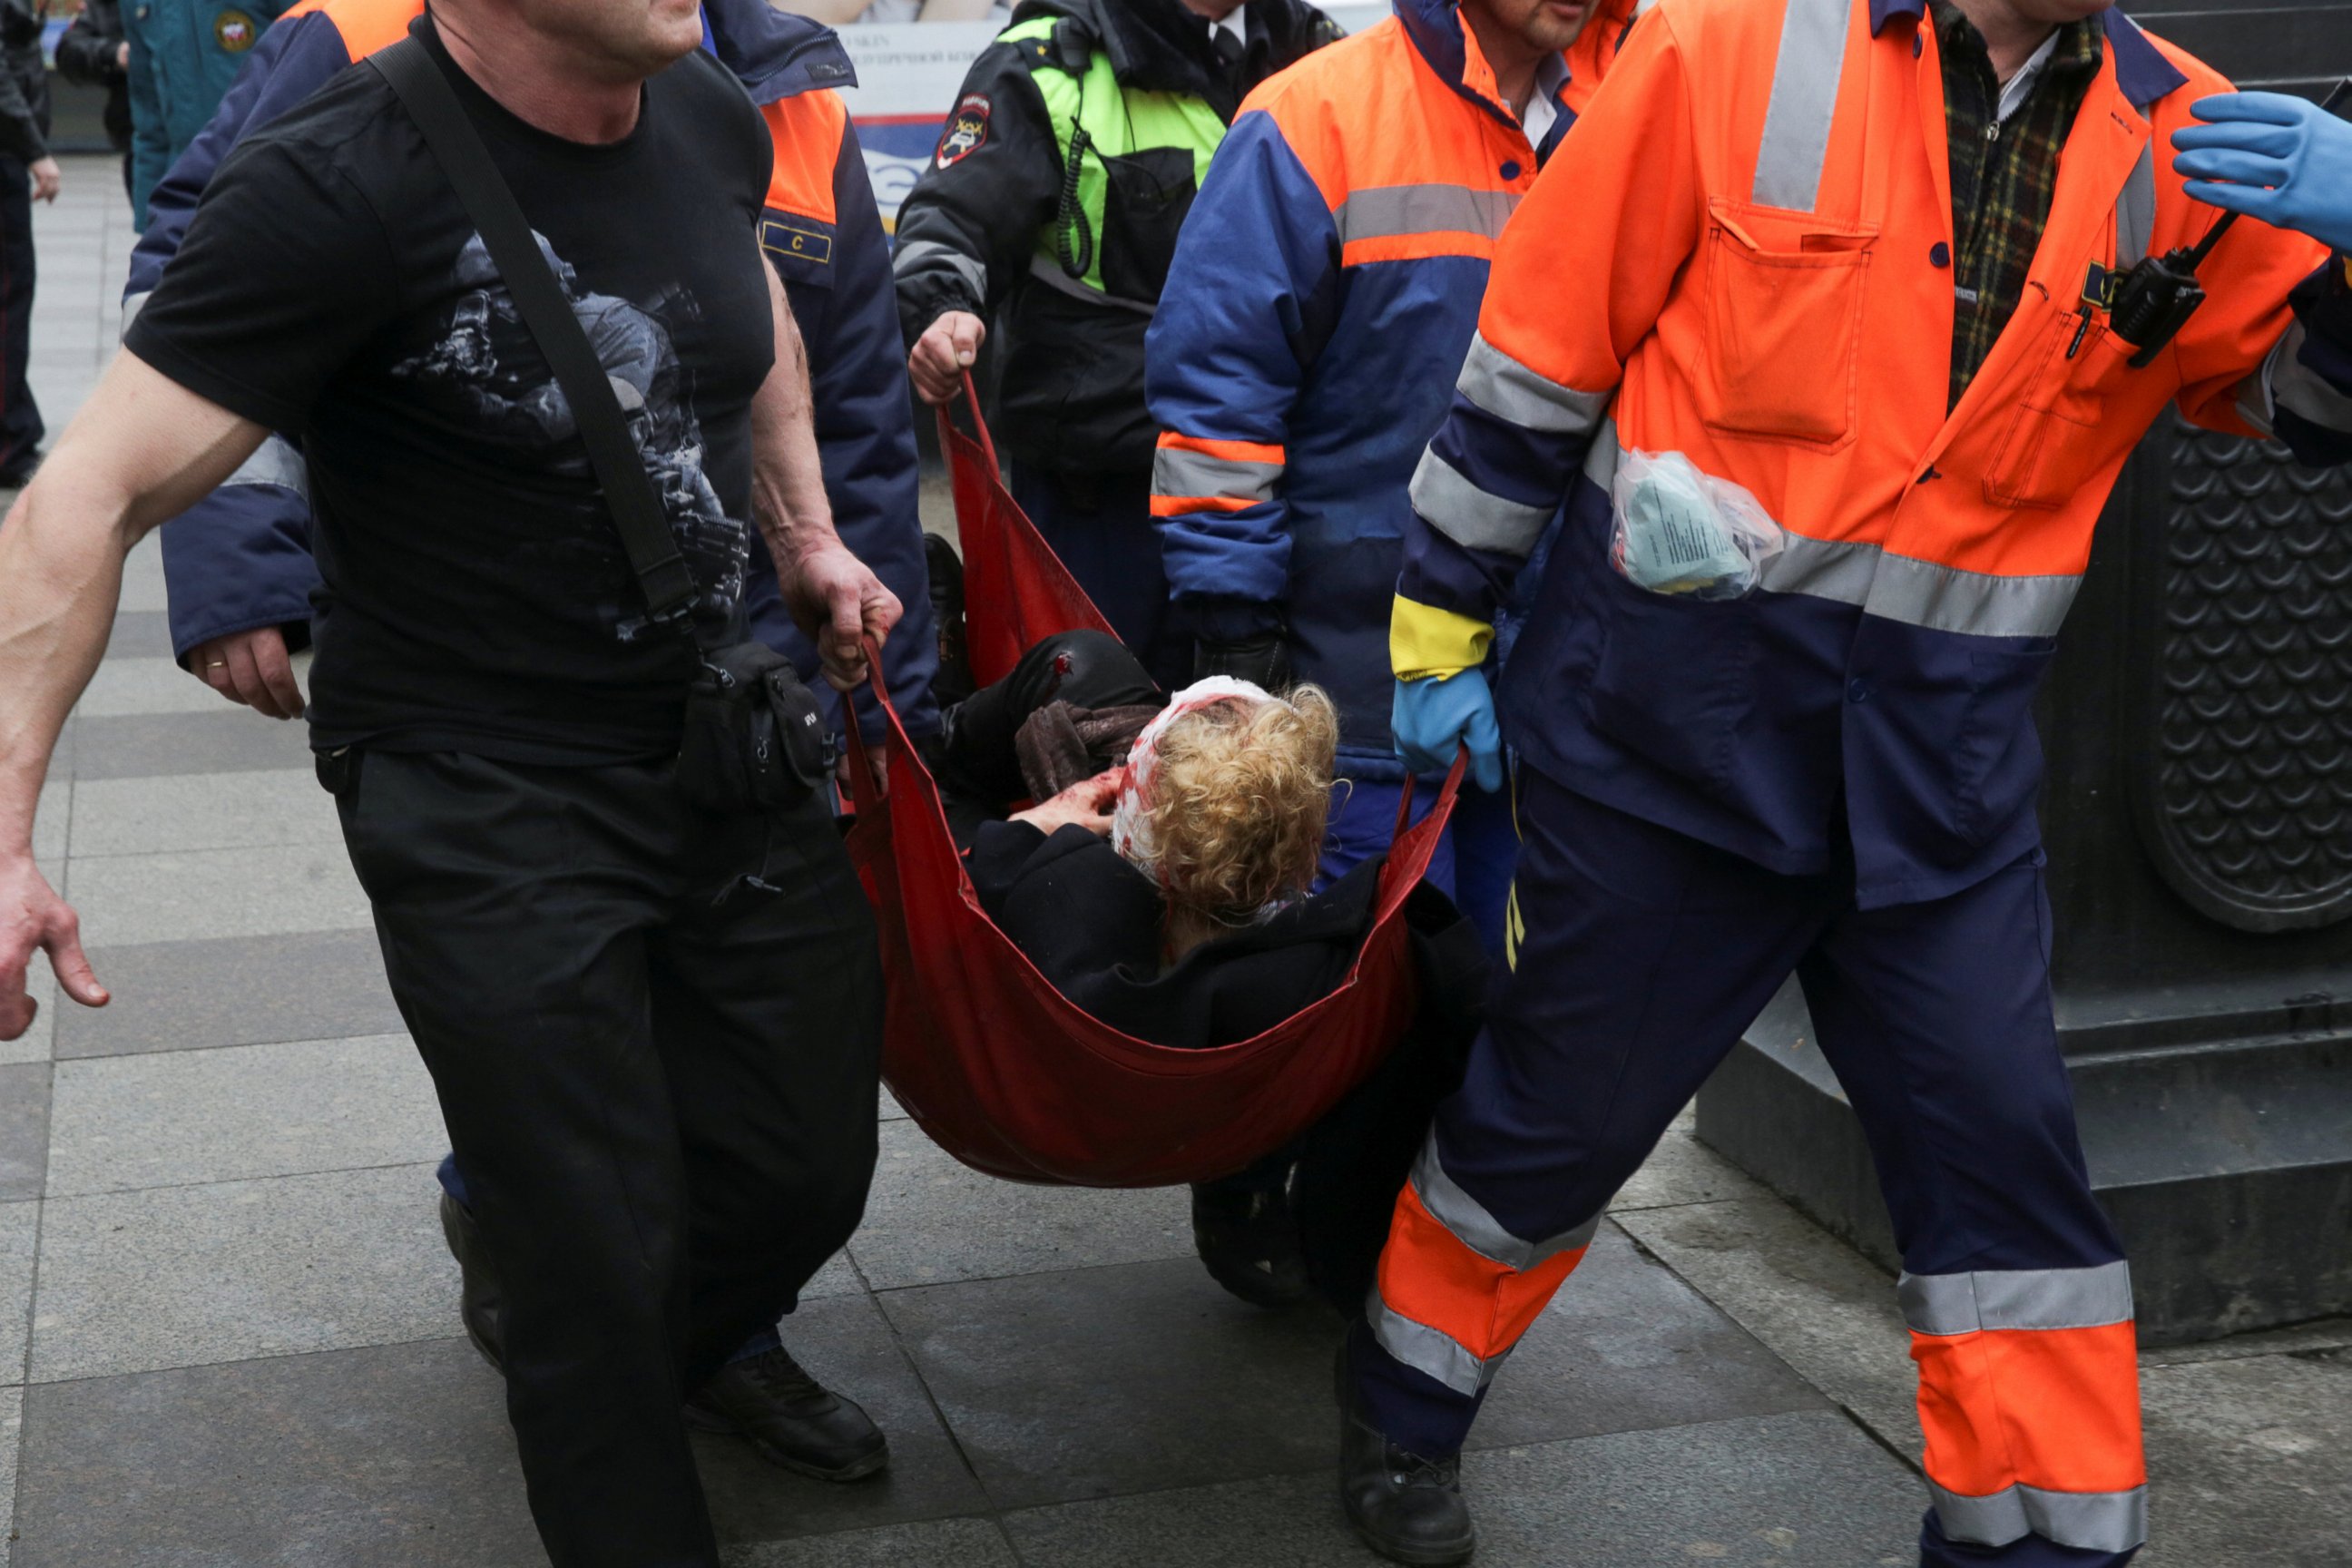 PHOTO: An injured person is helped by emergency services outside Sennaya Ploshchad metro station, following explosions in two train carriages at metro stations in St. Petersburg, Russia, April 3, 2017. 